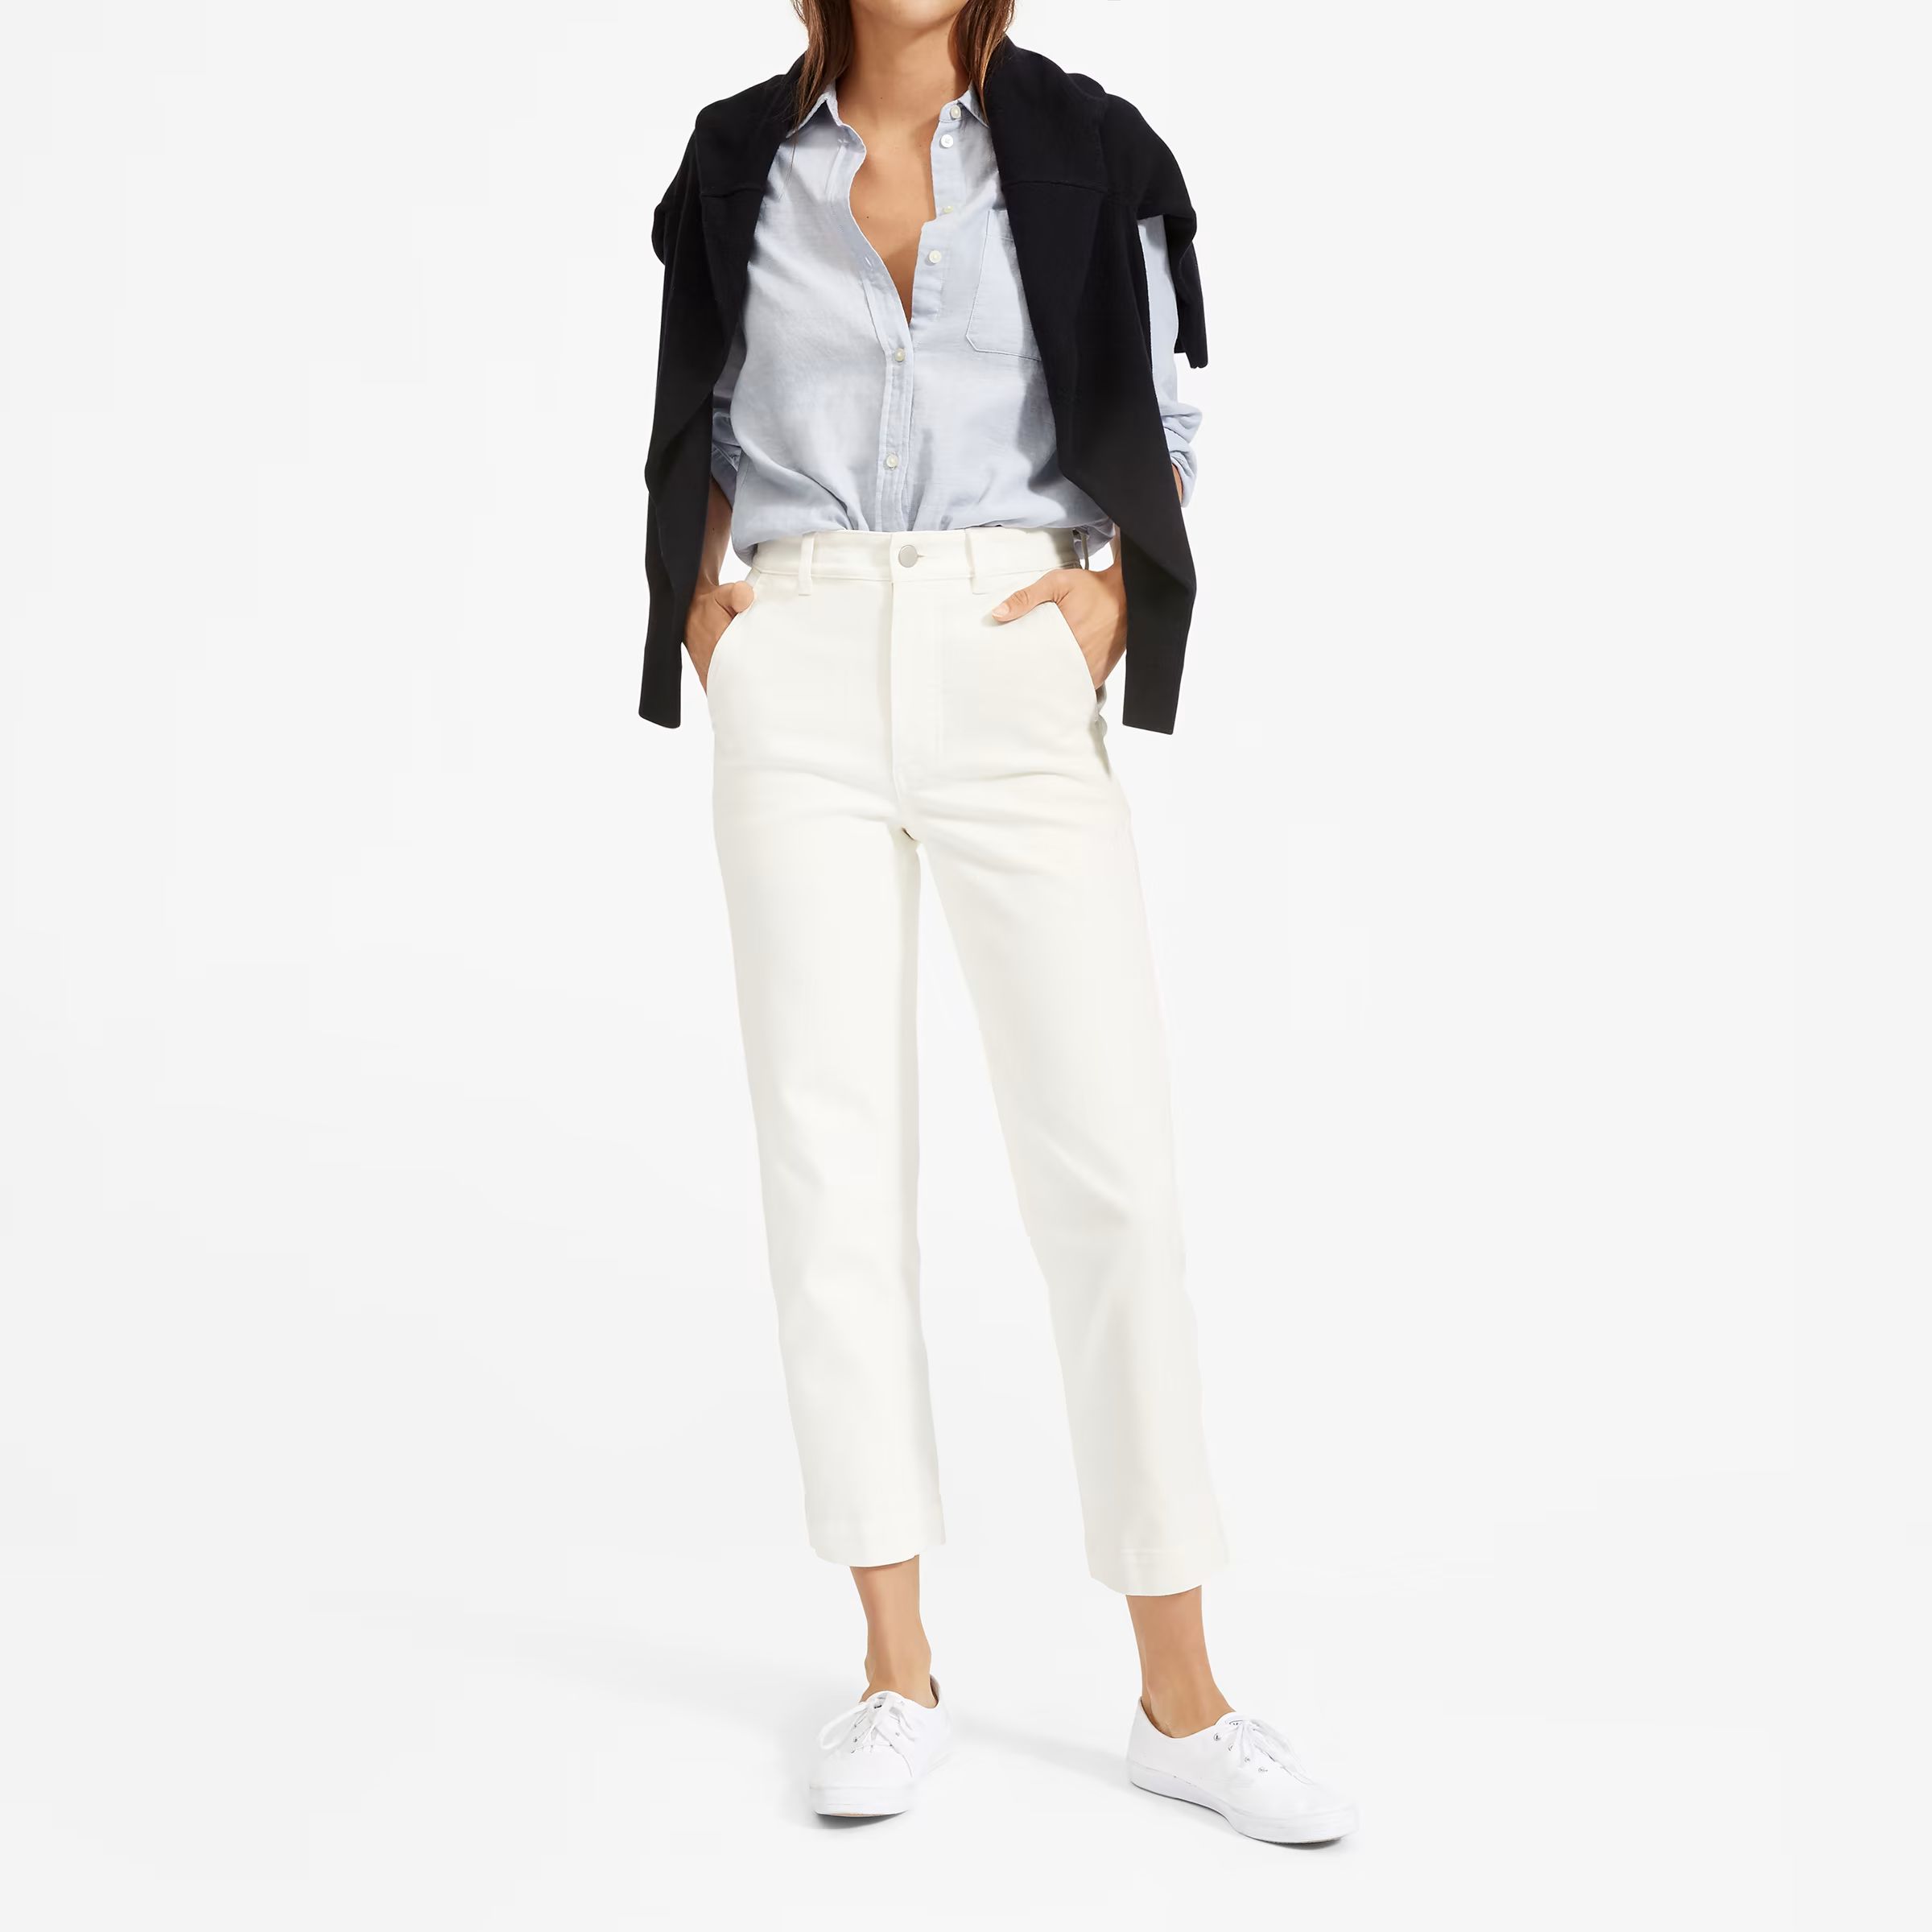 DetailsModel is 5′10″Wearing size 297% cotton, 3% elastaneMachine wash cold. Tumble dry low.M... | Everlane